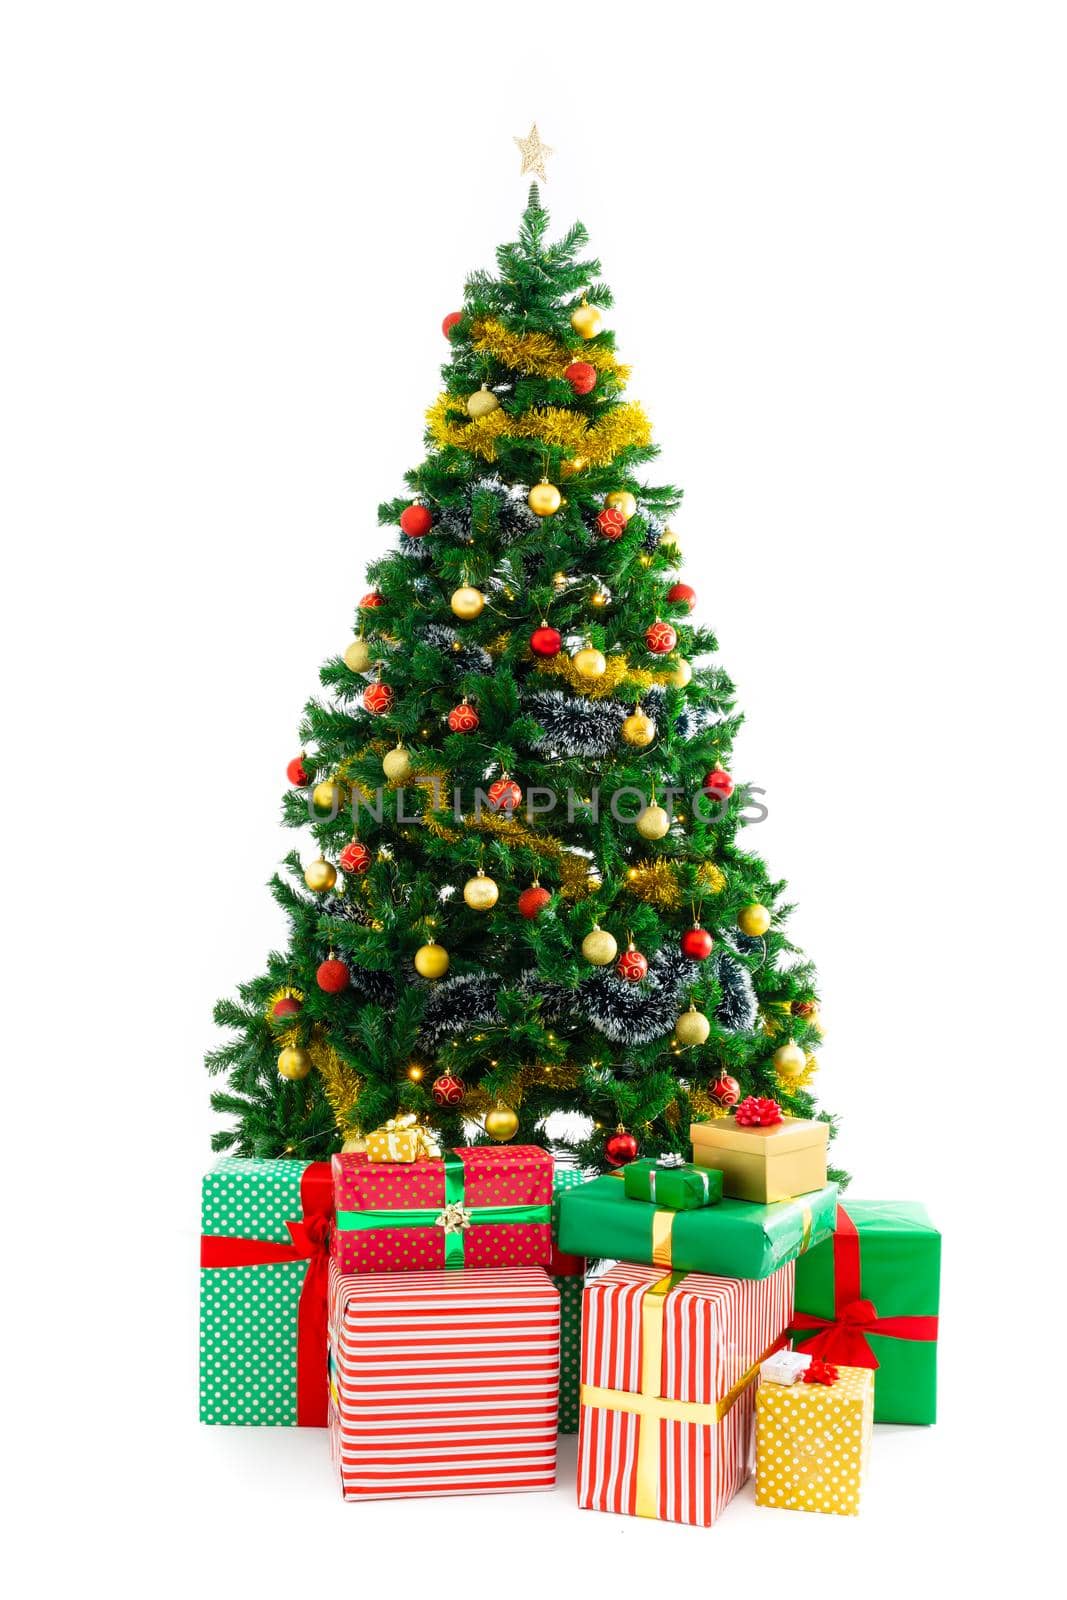 Composition of christmas tree with decorations and presents on white background by Wavebreakmedia